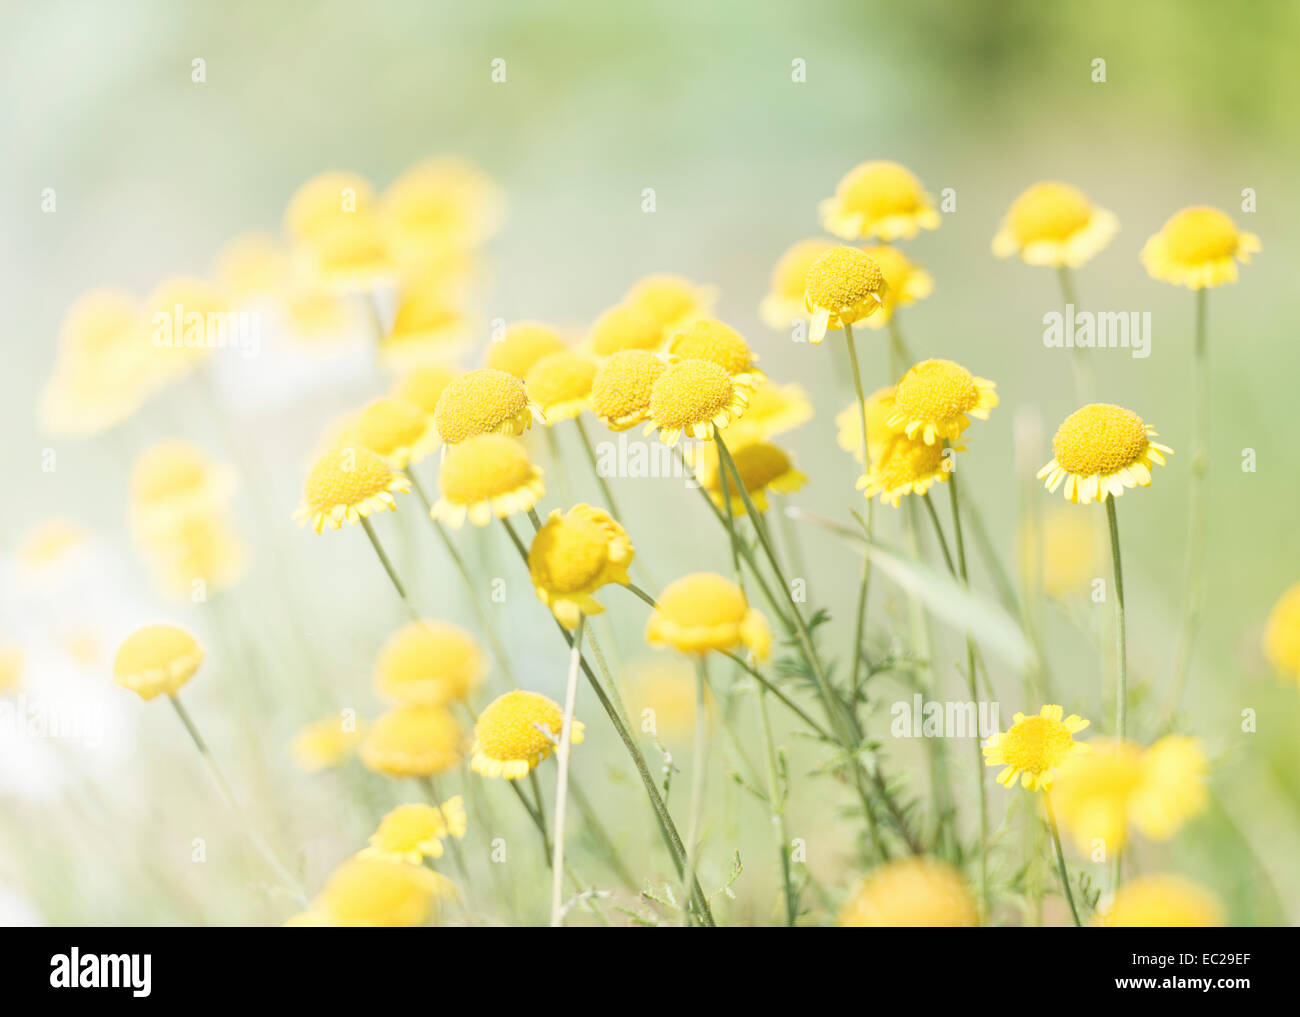 Tranquil summer nature scene, close up of yellow flowers in sunlight Stock Photo